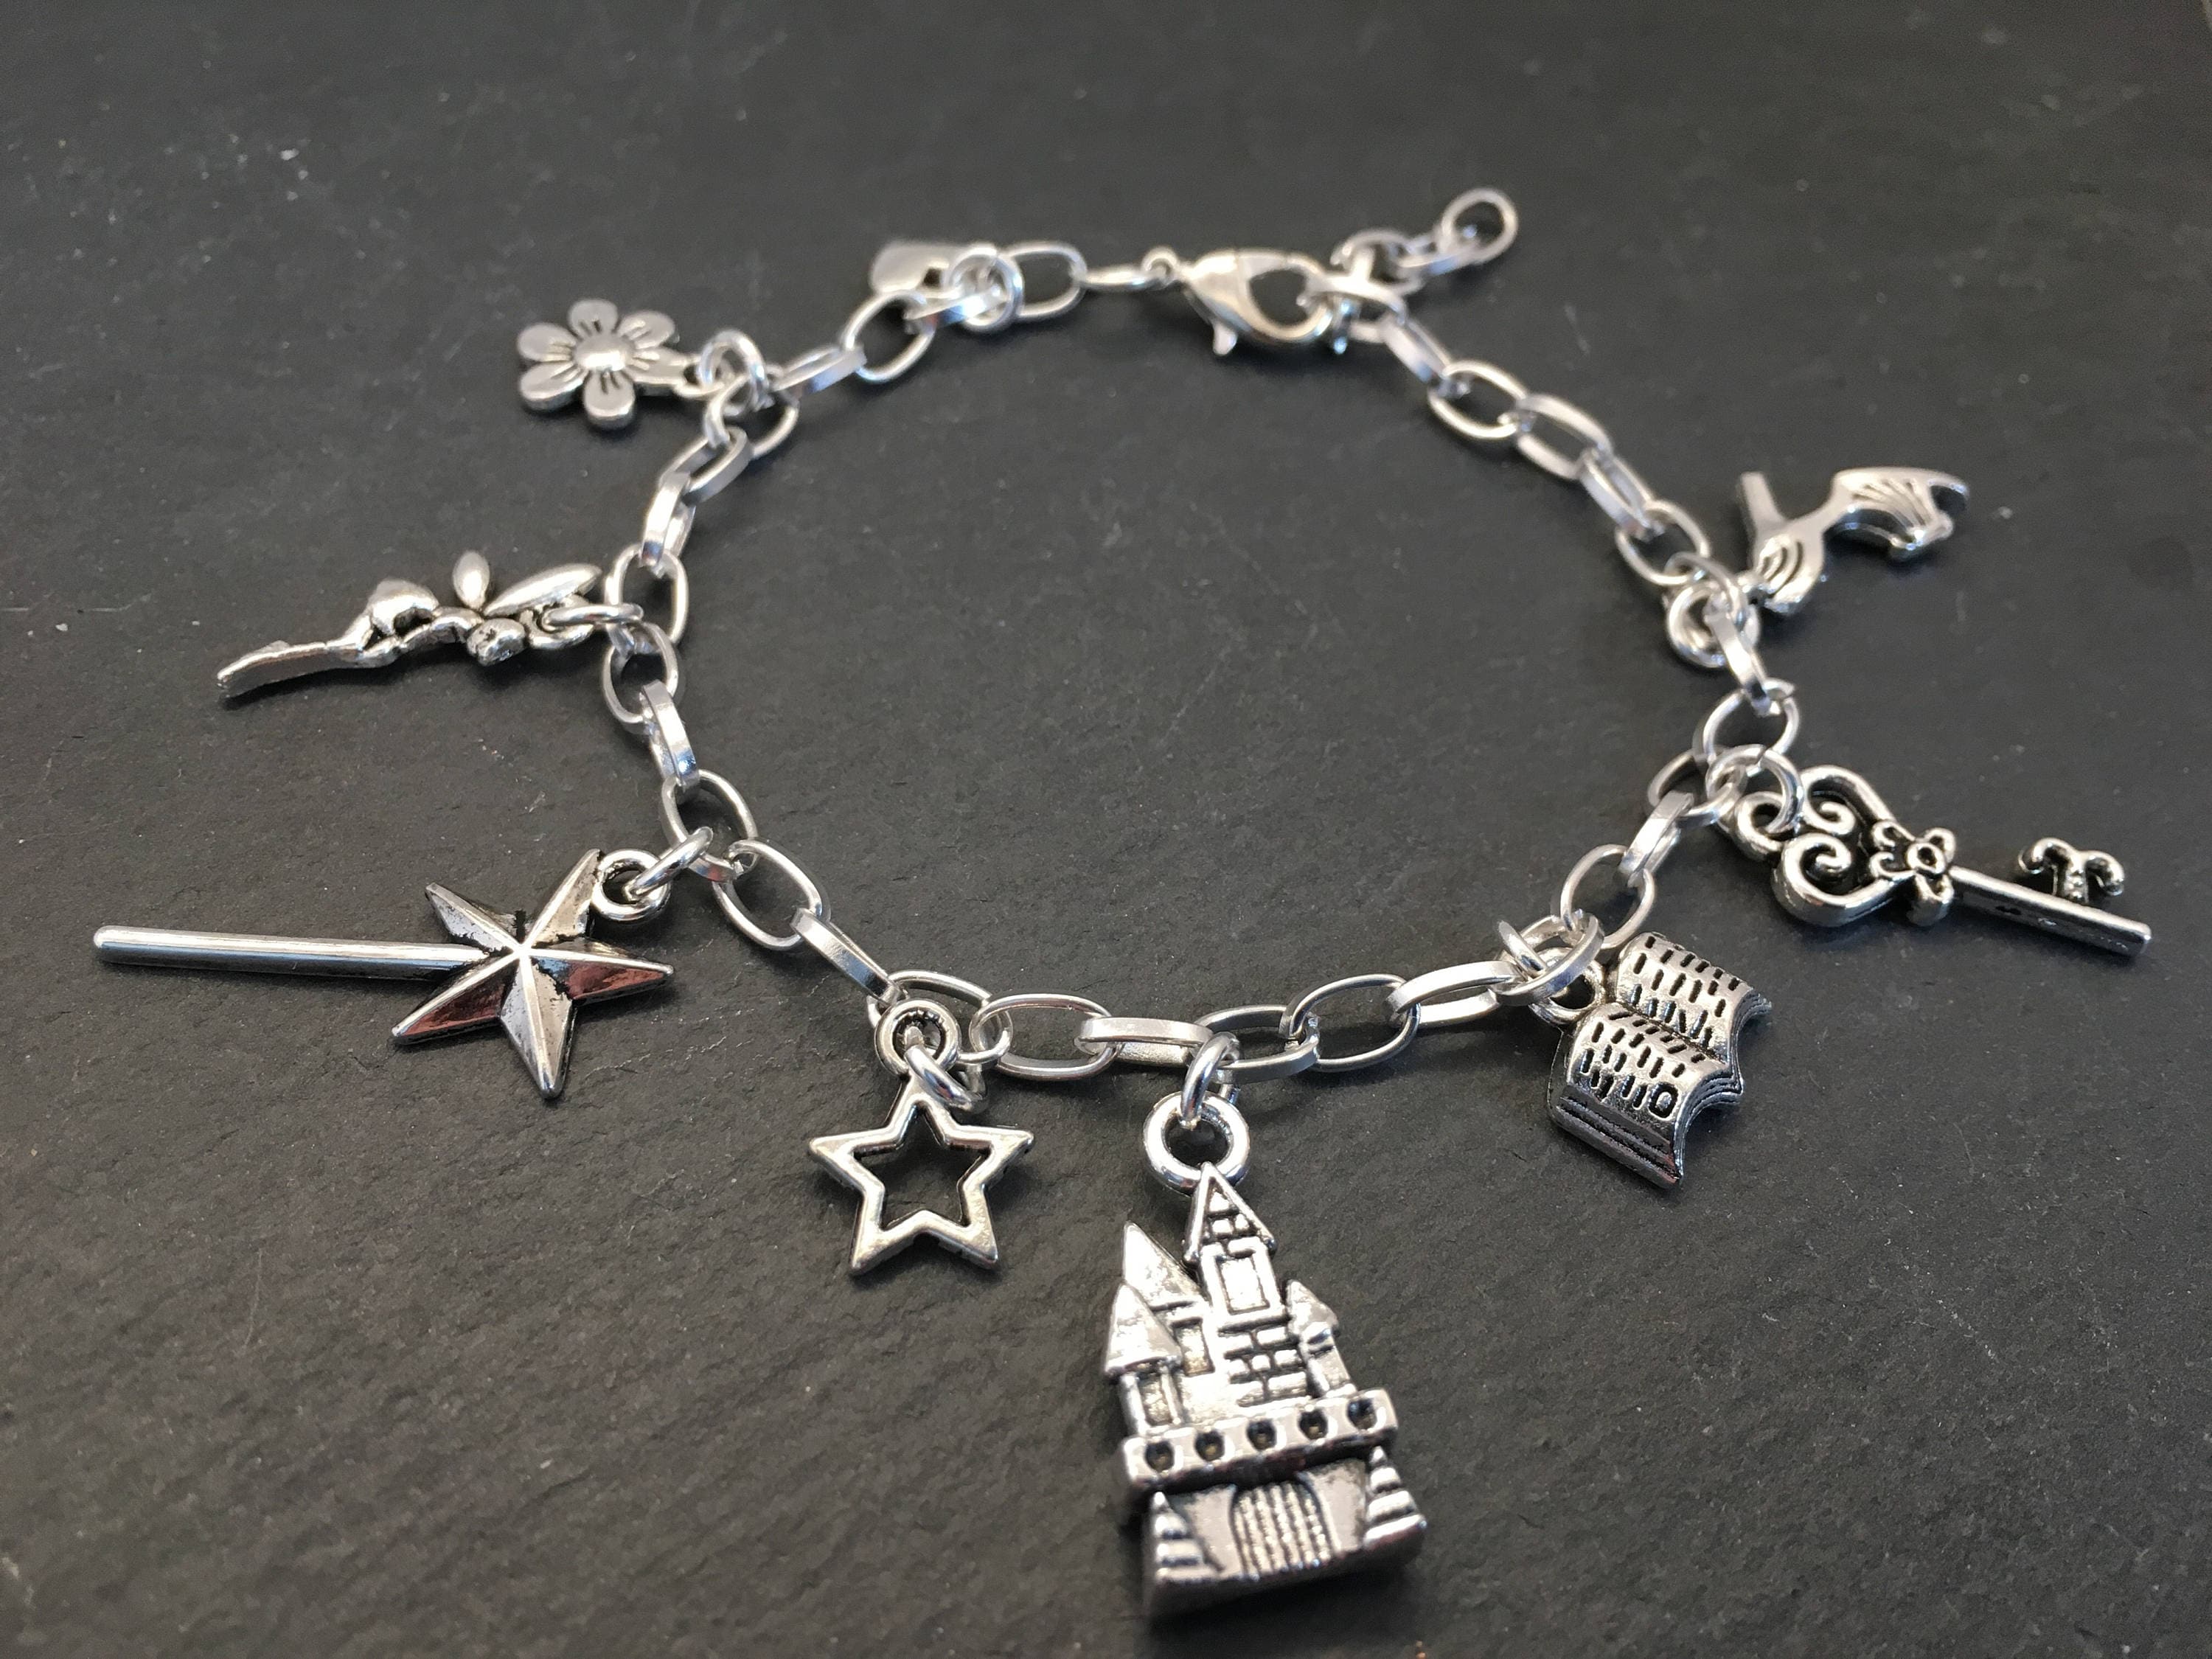 7 Sterling Silver Girl's Link Charm Bracelet for Kids - Base Starter Charm Bracelet for Little Girls - Add Your Charms at in Season Jewelry